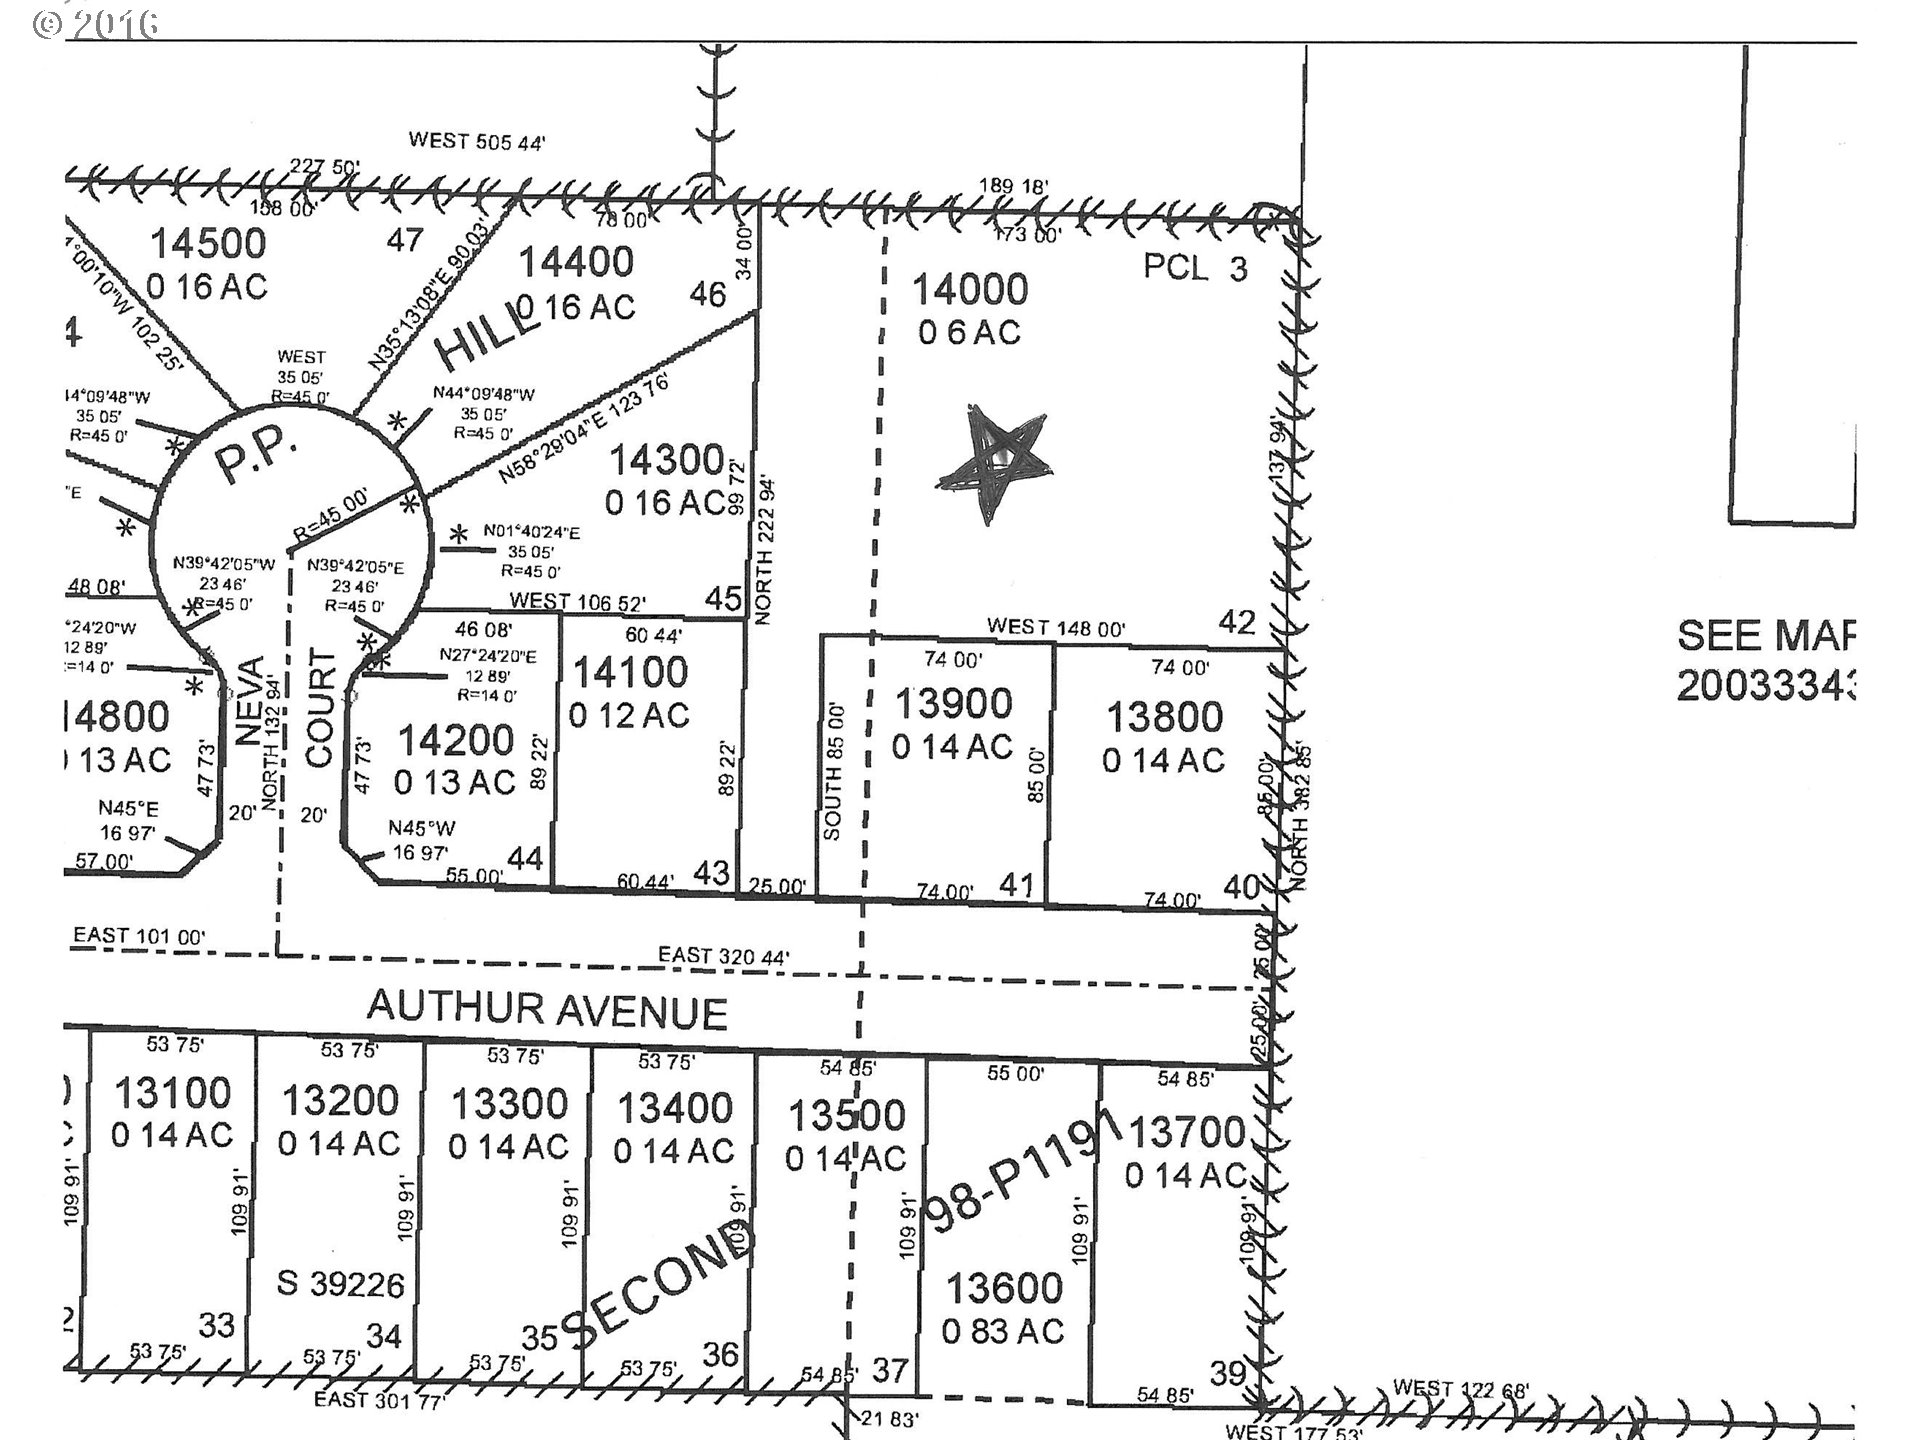 Arthur ST Lot42 Eugene Home Listings - Real Pro Systems Real Estate Marketing